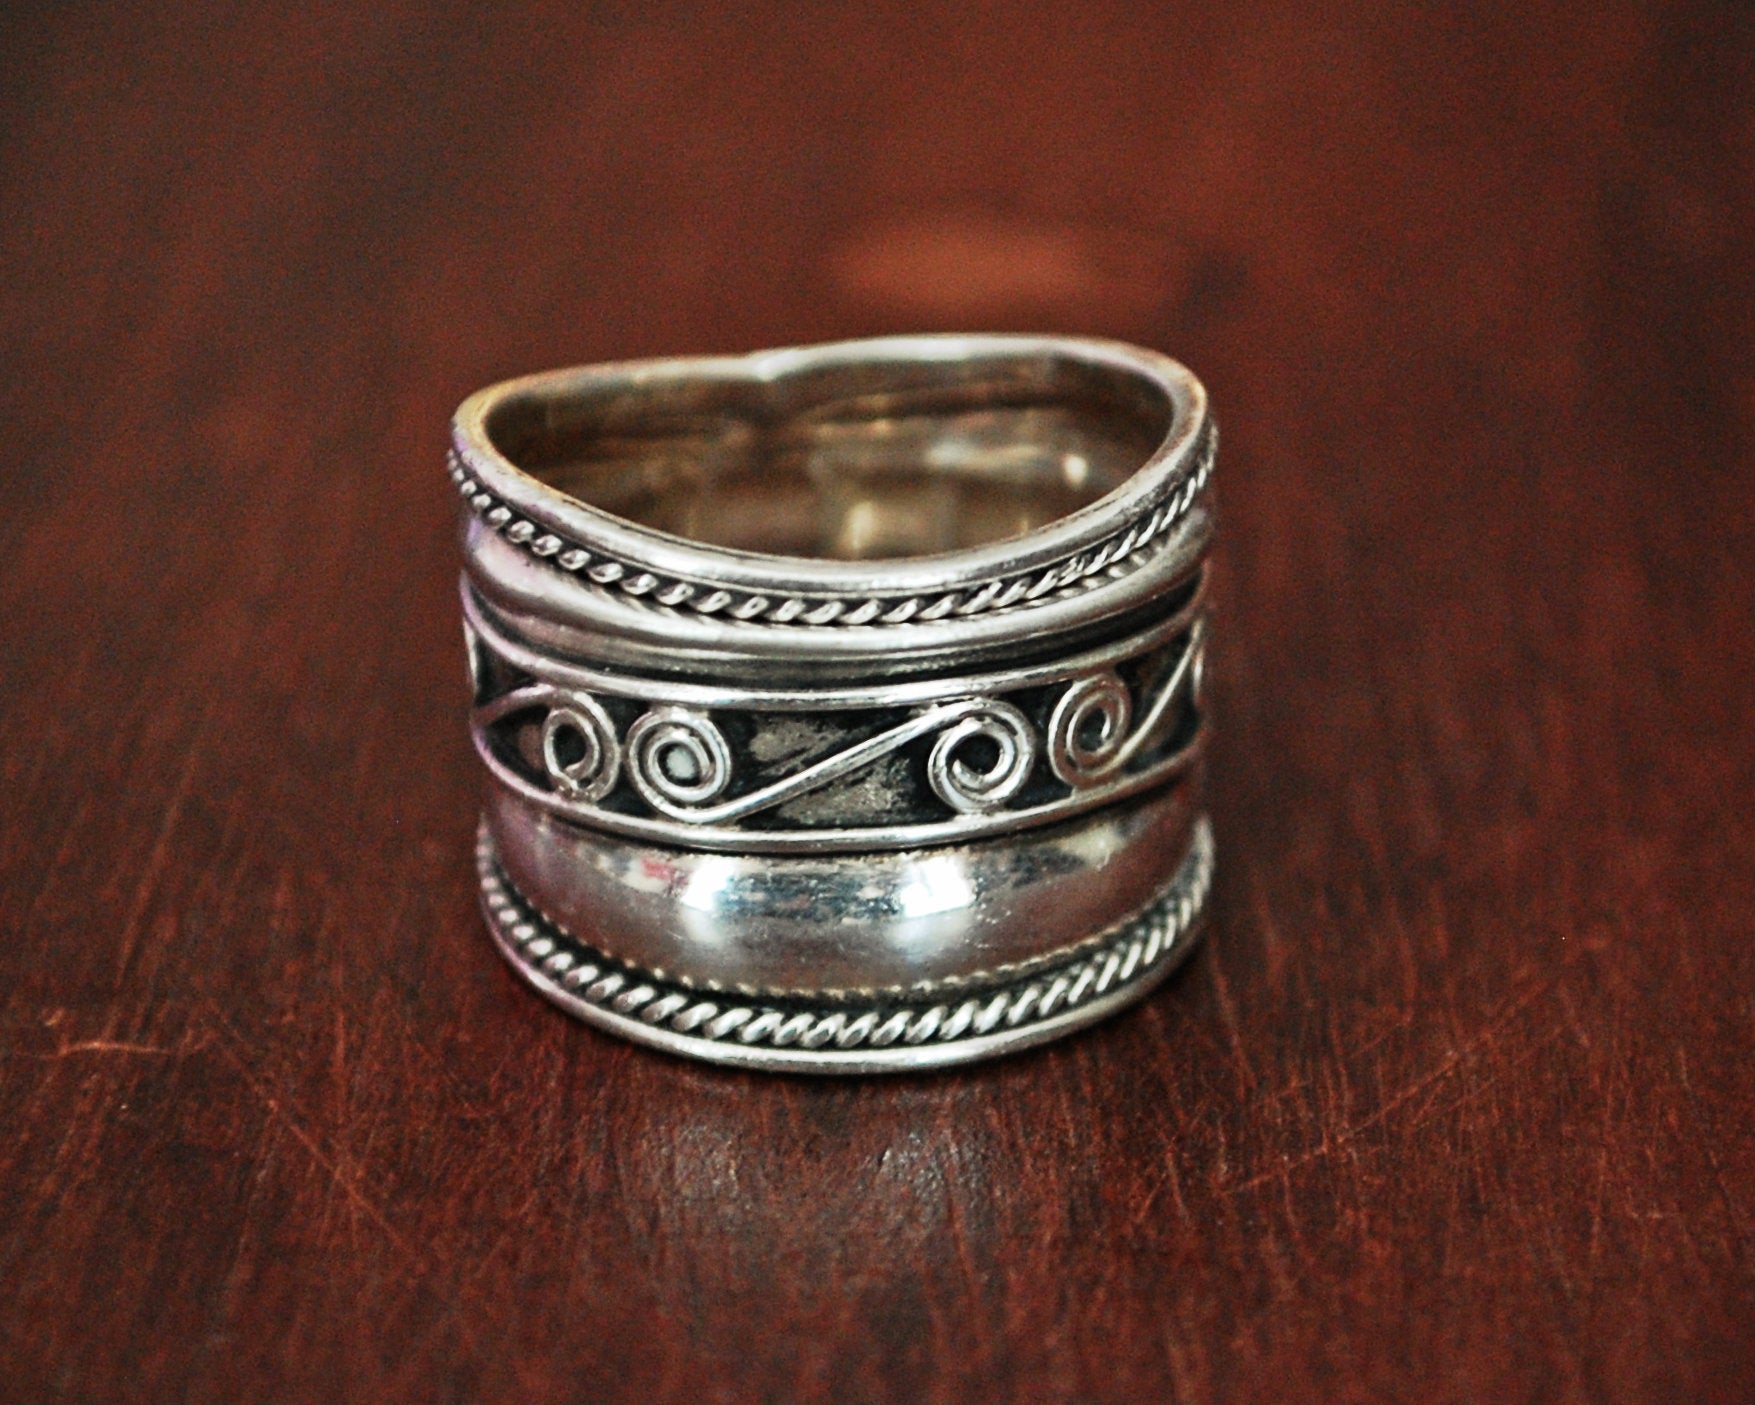 Ethnic Cigar Band Ring from India - Size 8.5